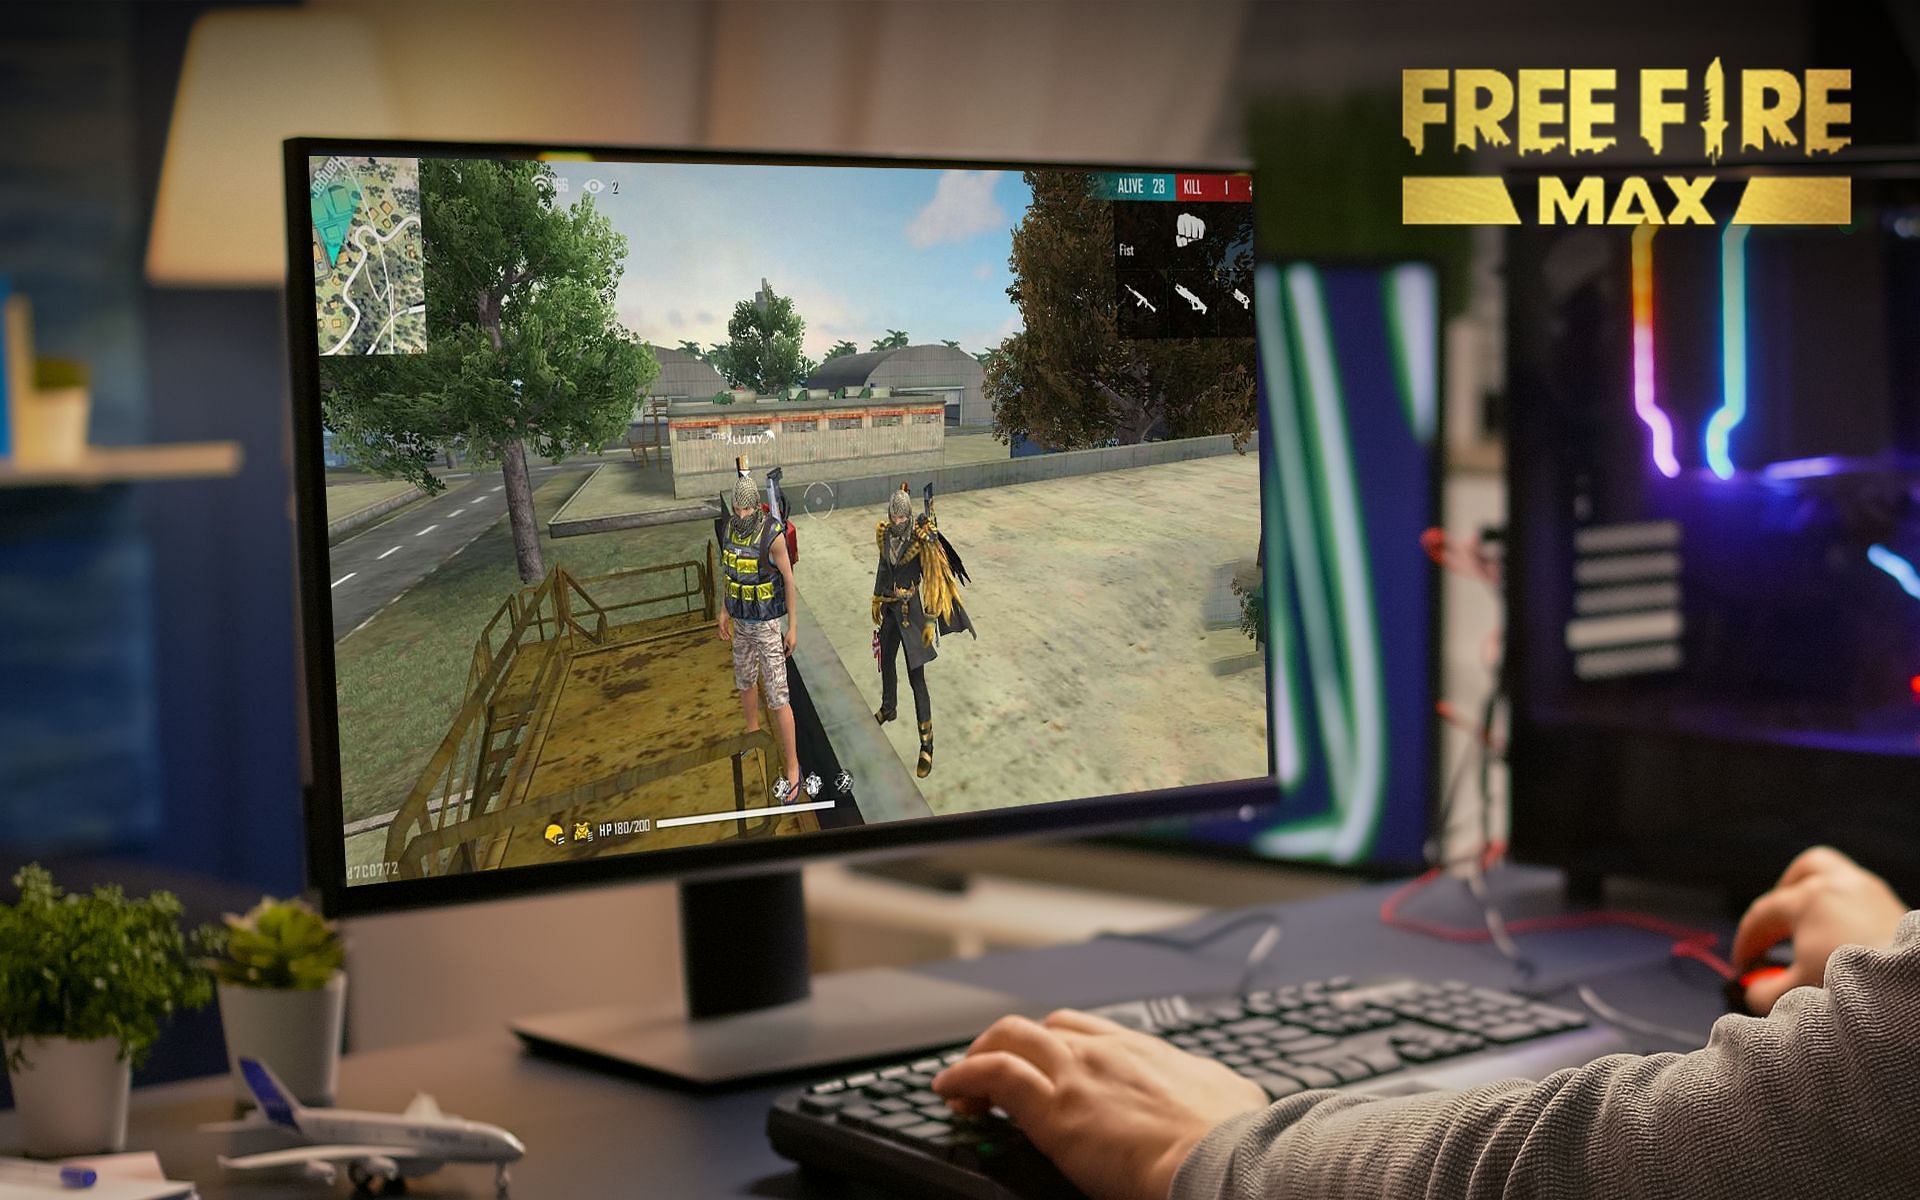 How to play free fire in laptop